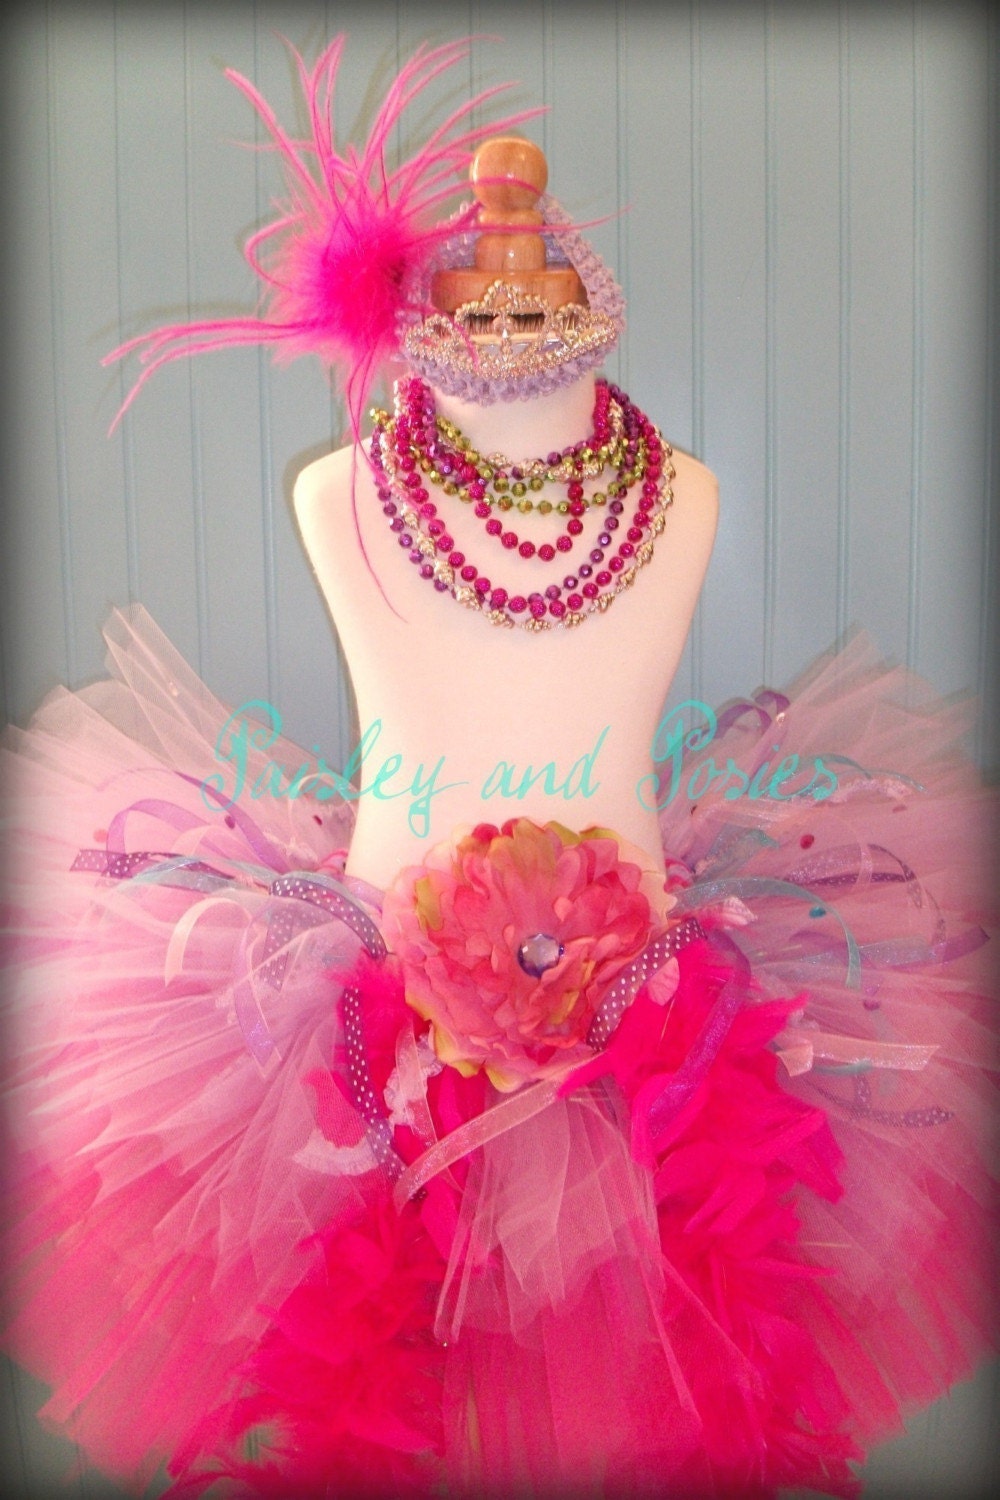 ALL NEW - Fancy Nancy Inspired Dress Up Tutu - Sizes Newborn up to 6 - Includes Headband and Tiarra